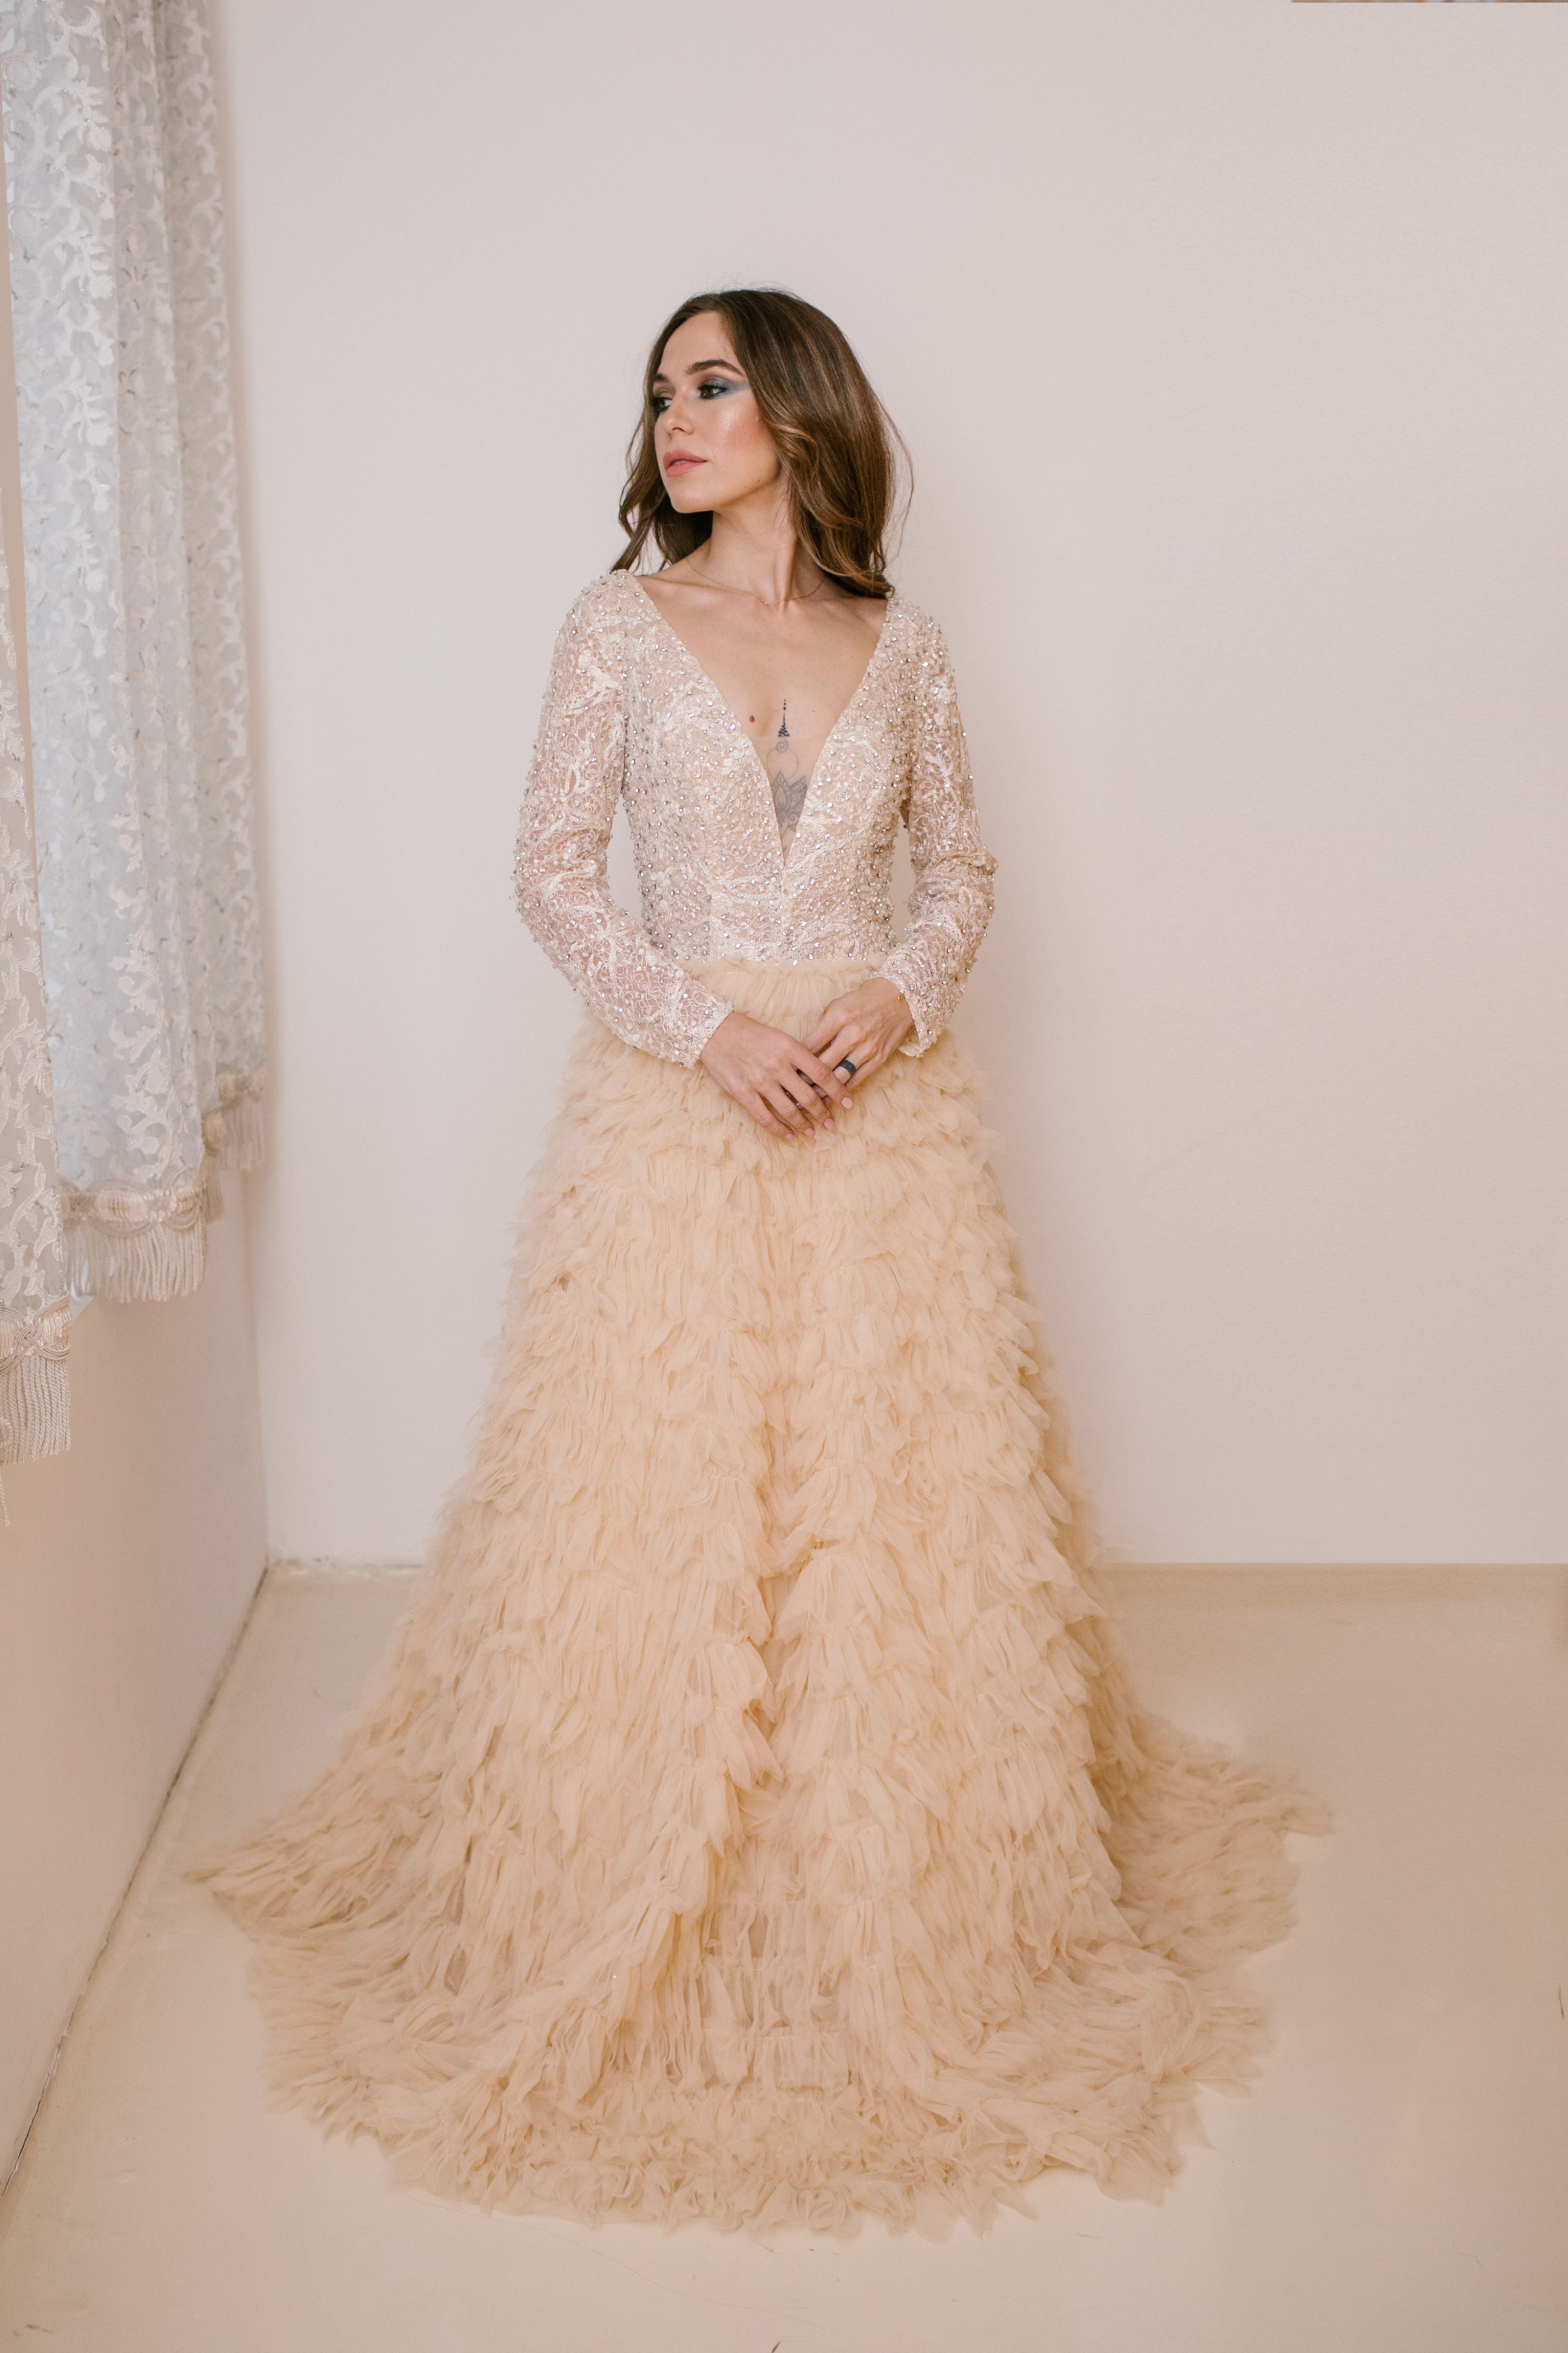 Tulle Gown with Ruffles in Beige